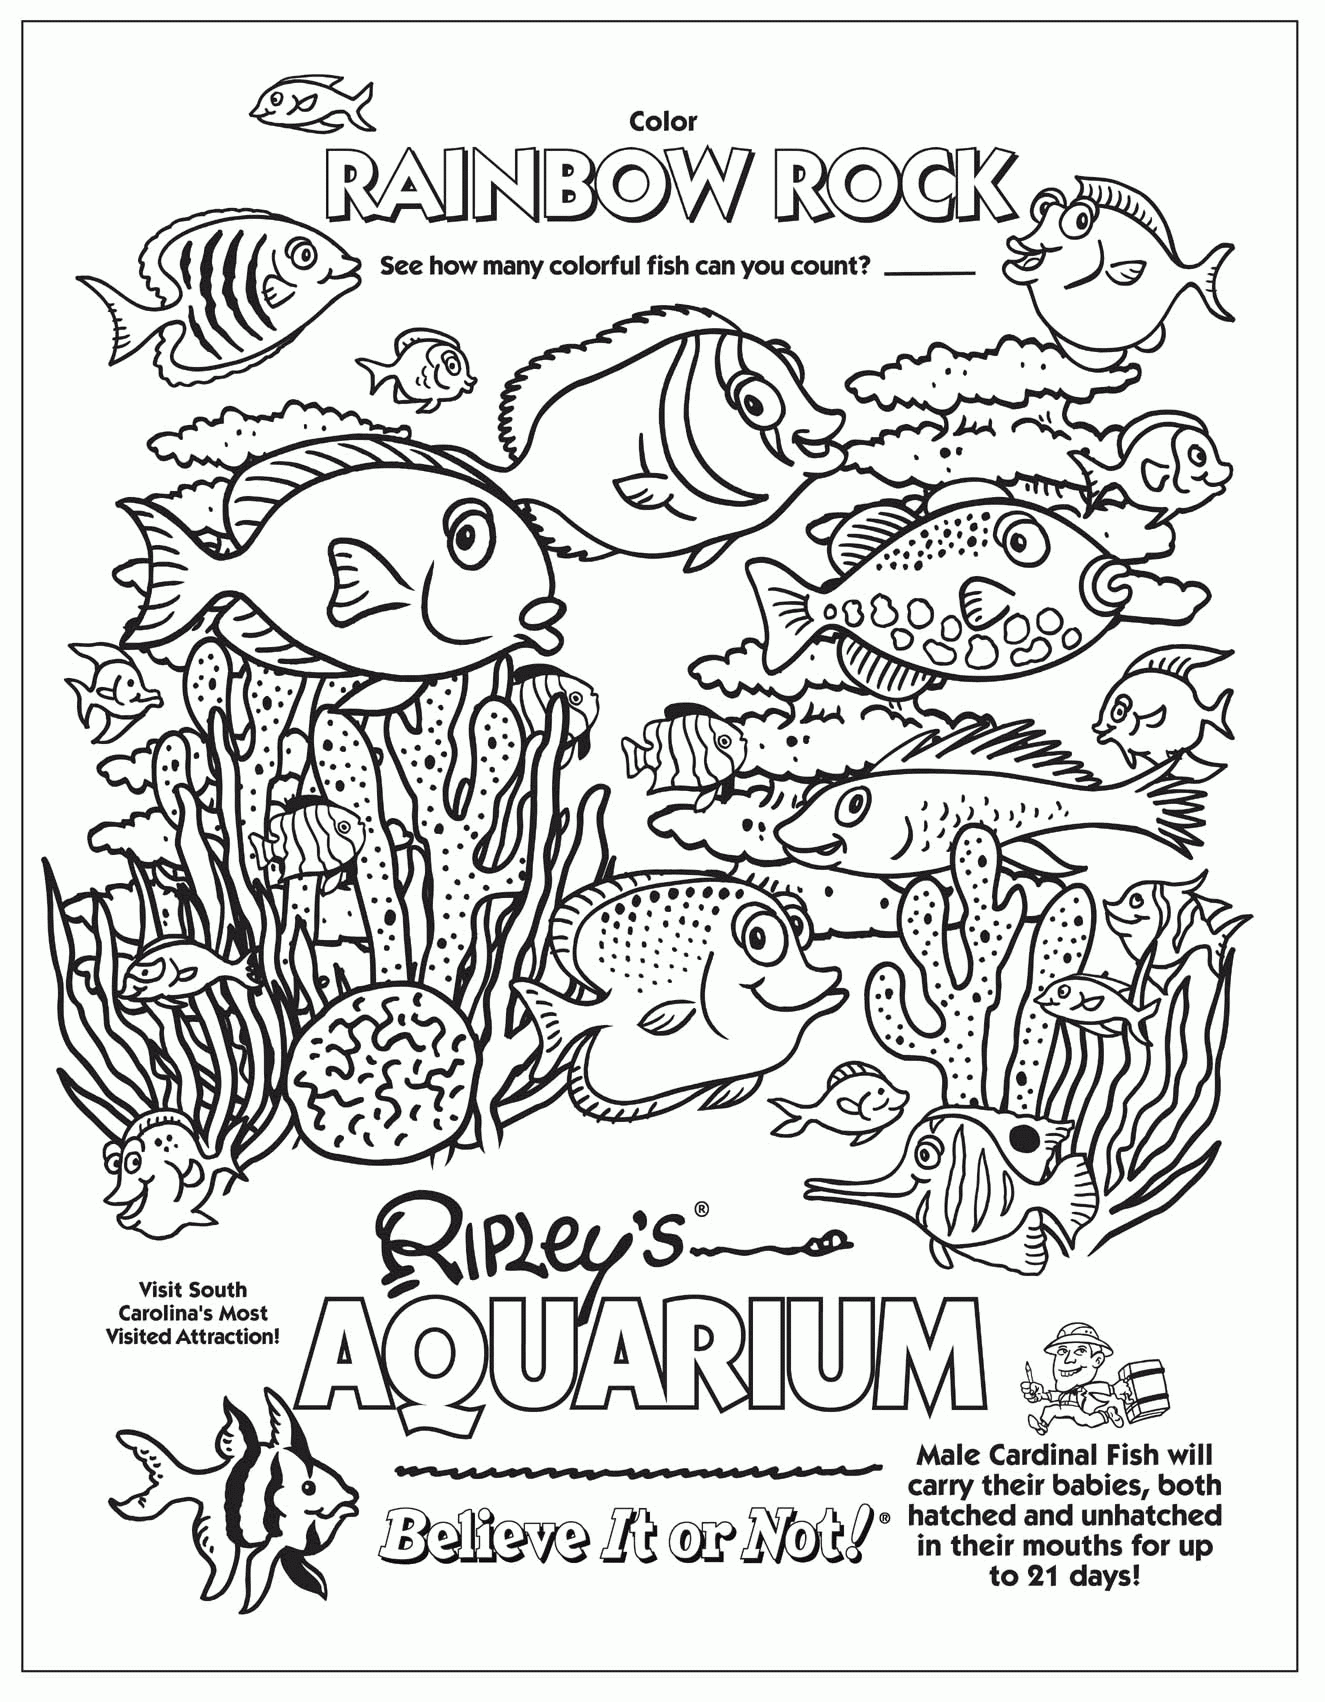 amazing Aquarium coloring page Kids Coloring Book Learning stylish structure – fish in aquarium coloring pages